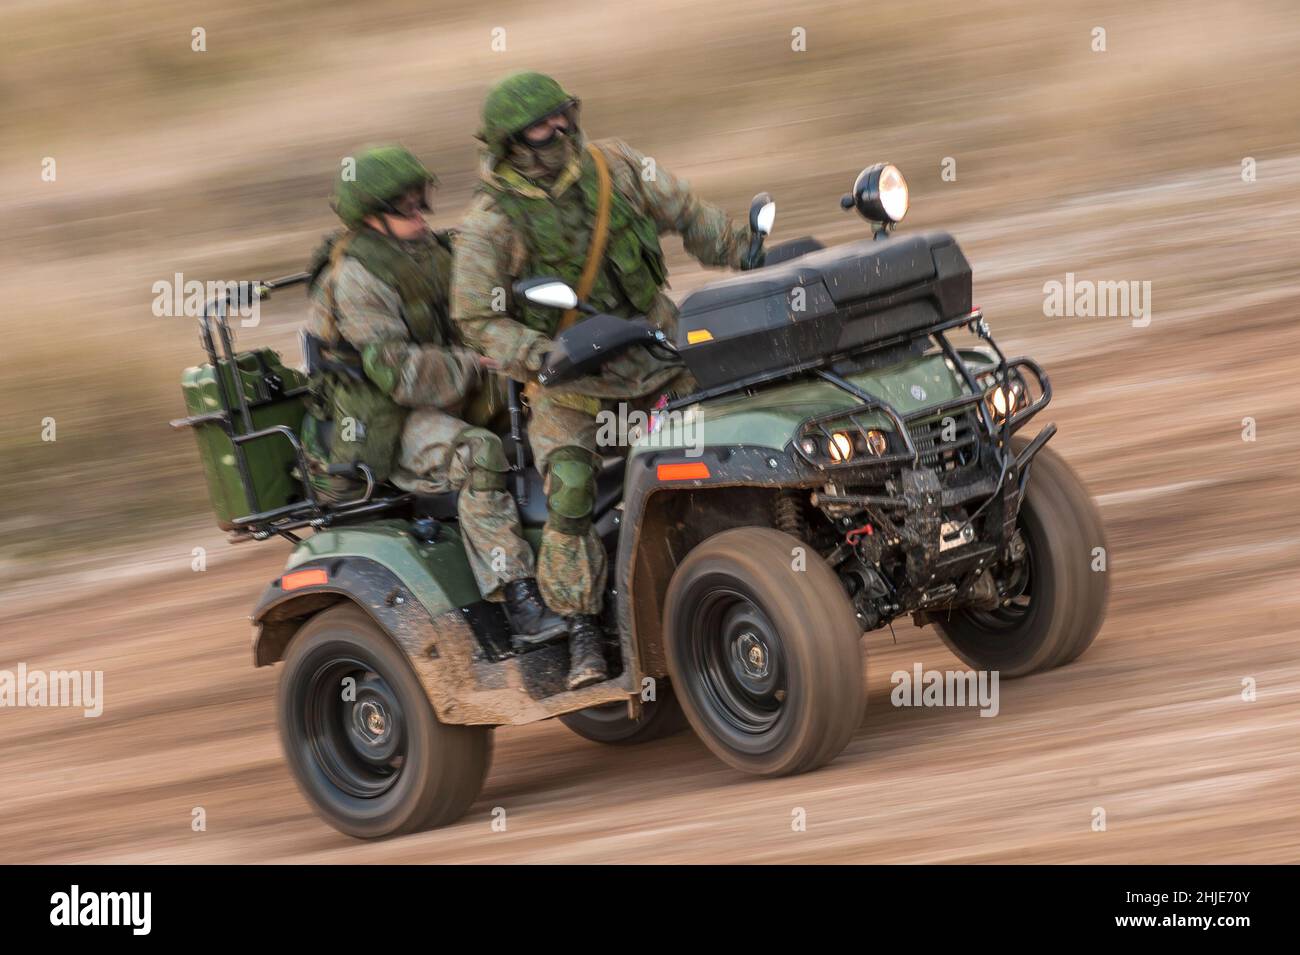 UNDISCLOSED LOCATION, November 2016; Russian Armed Forces Airborne troops (VDV) soldiers riding on AM-1 ATM (all terrain vehicle or quad) Stock Photo